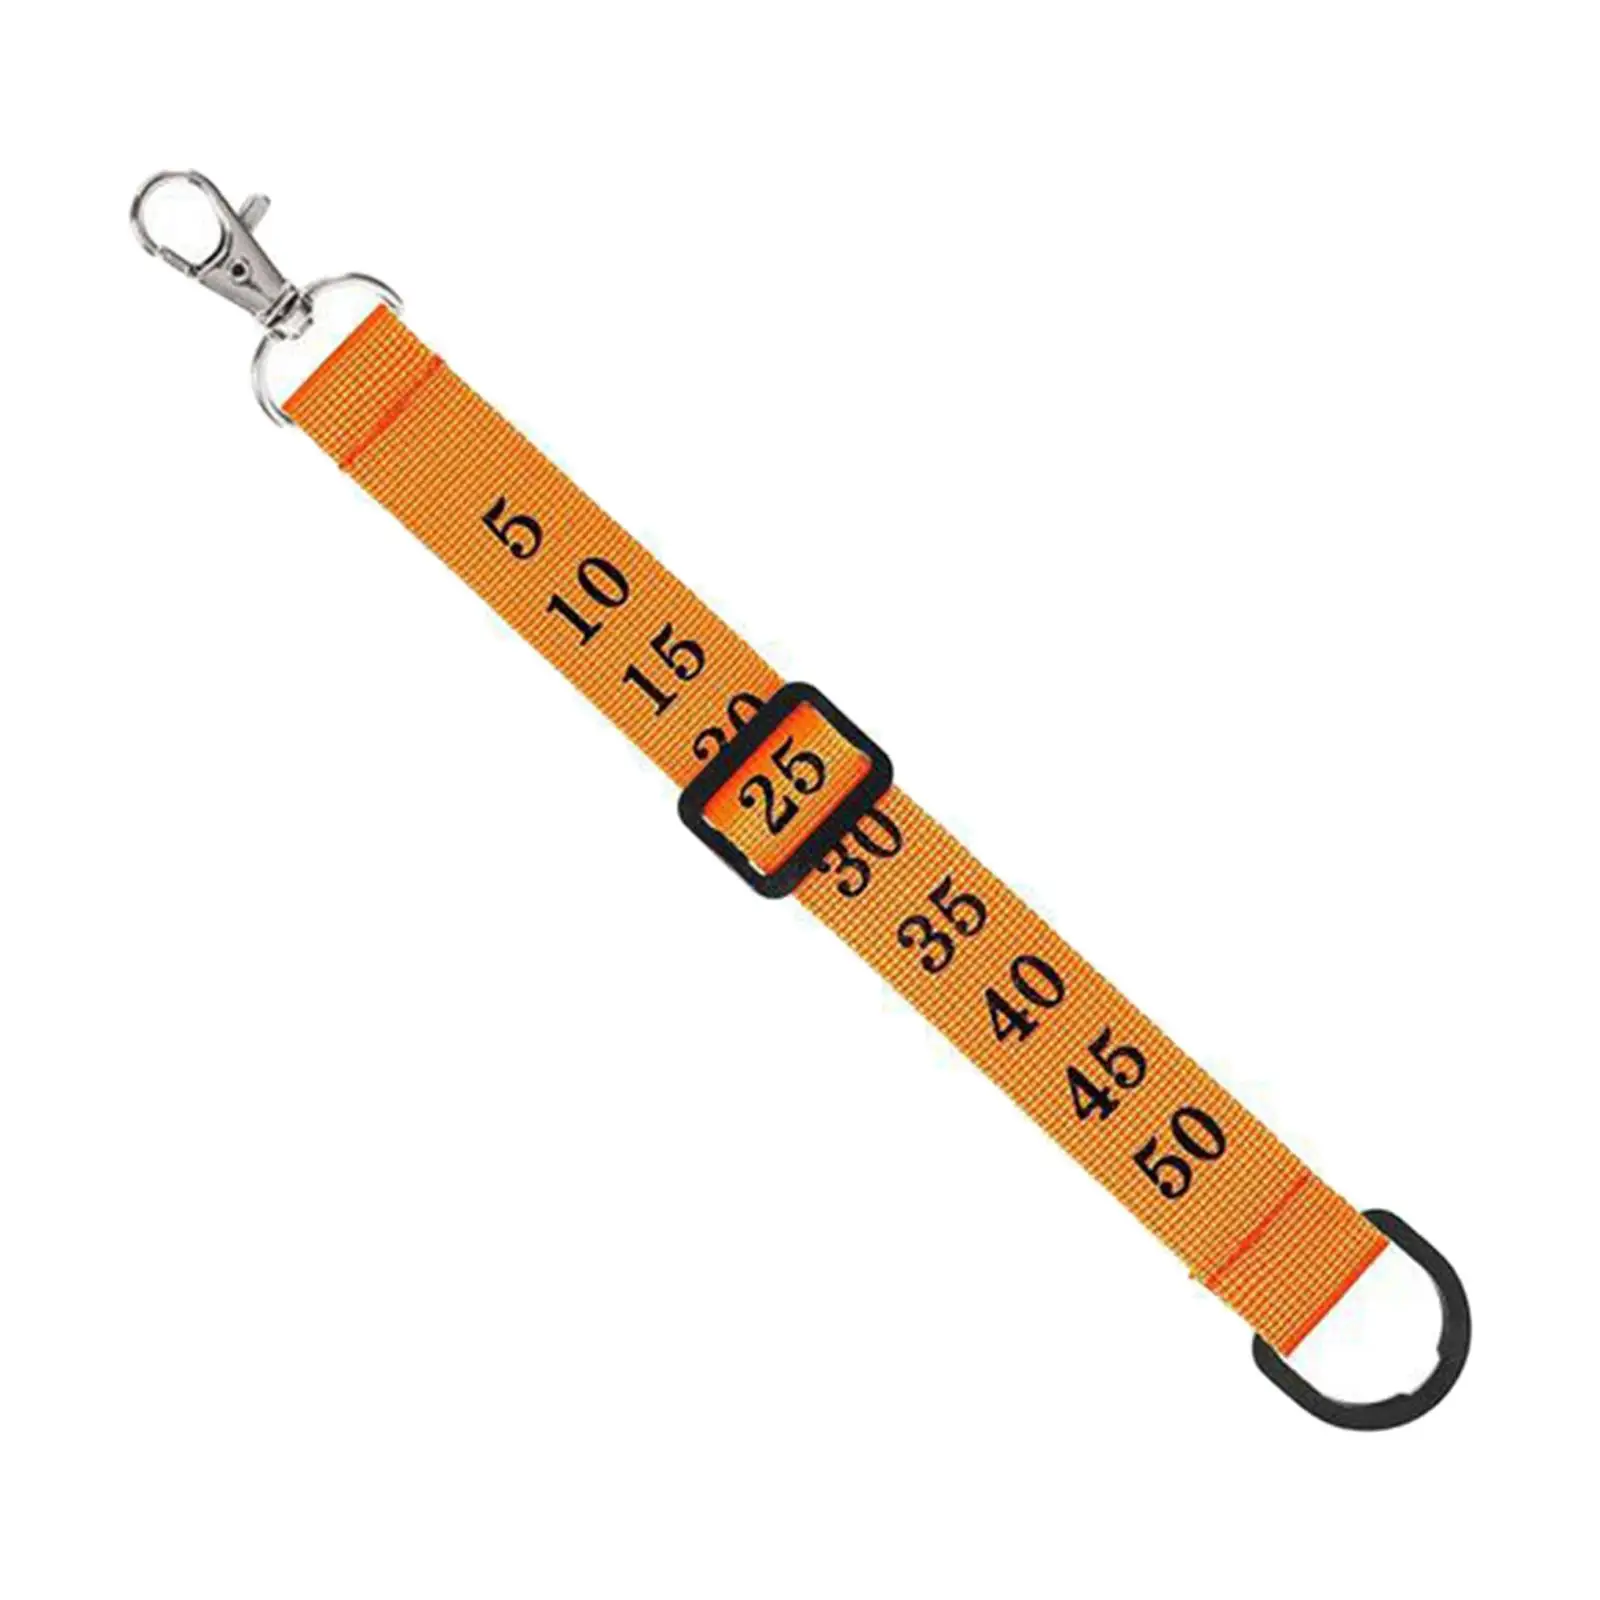 Football Chain Clip Polyester Yard Marker Accessories Football Referee Gear Practical Universal Lightweight Durable Portable